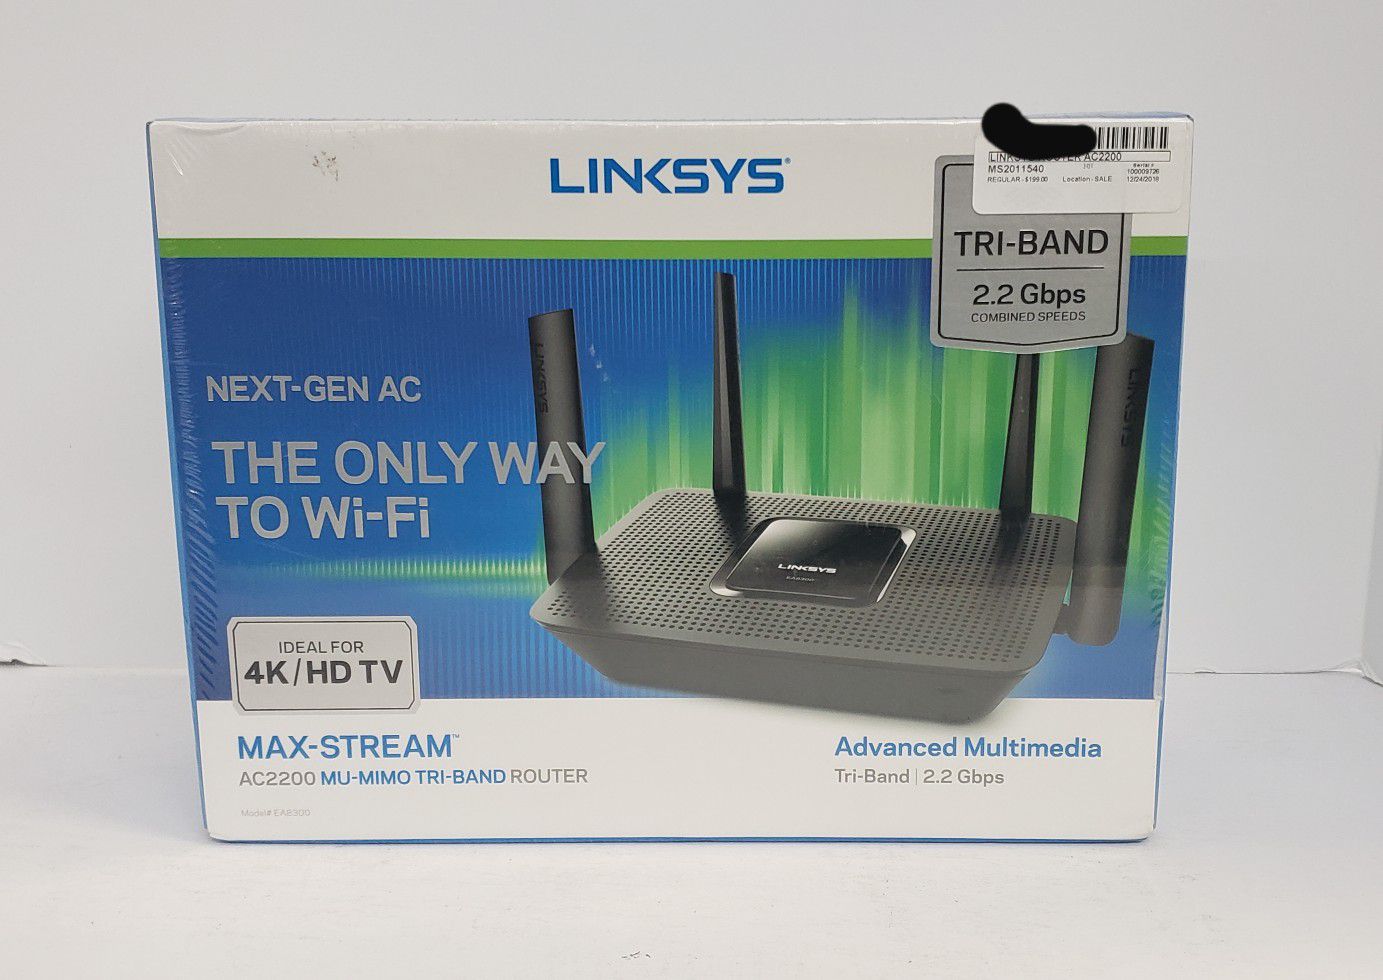 Brand New Linksys Next- Gen AC The Only Way to Wi-fi Max- Stream AC2200 MU-MIMO TRI- BAND ROUTER AE8300